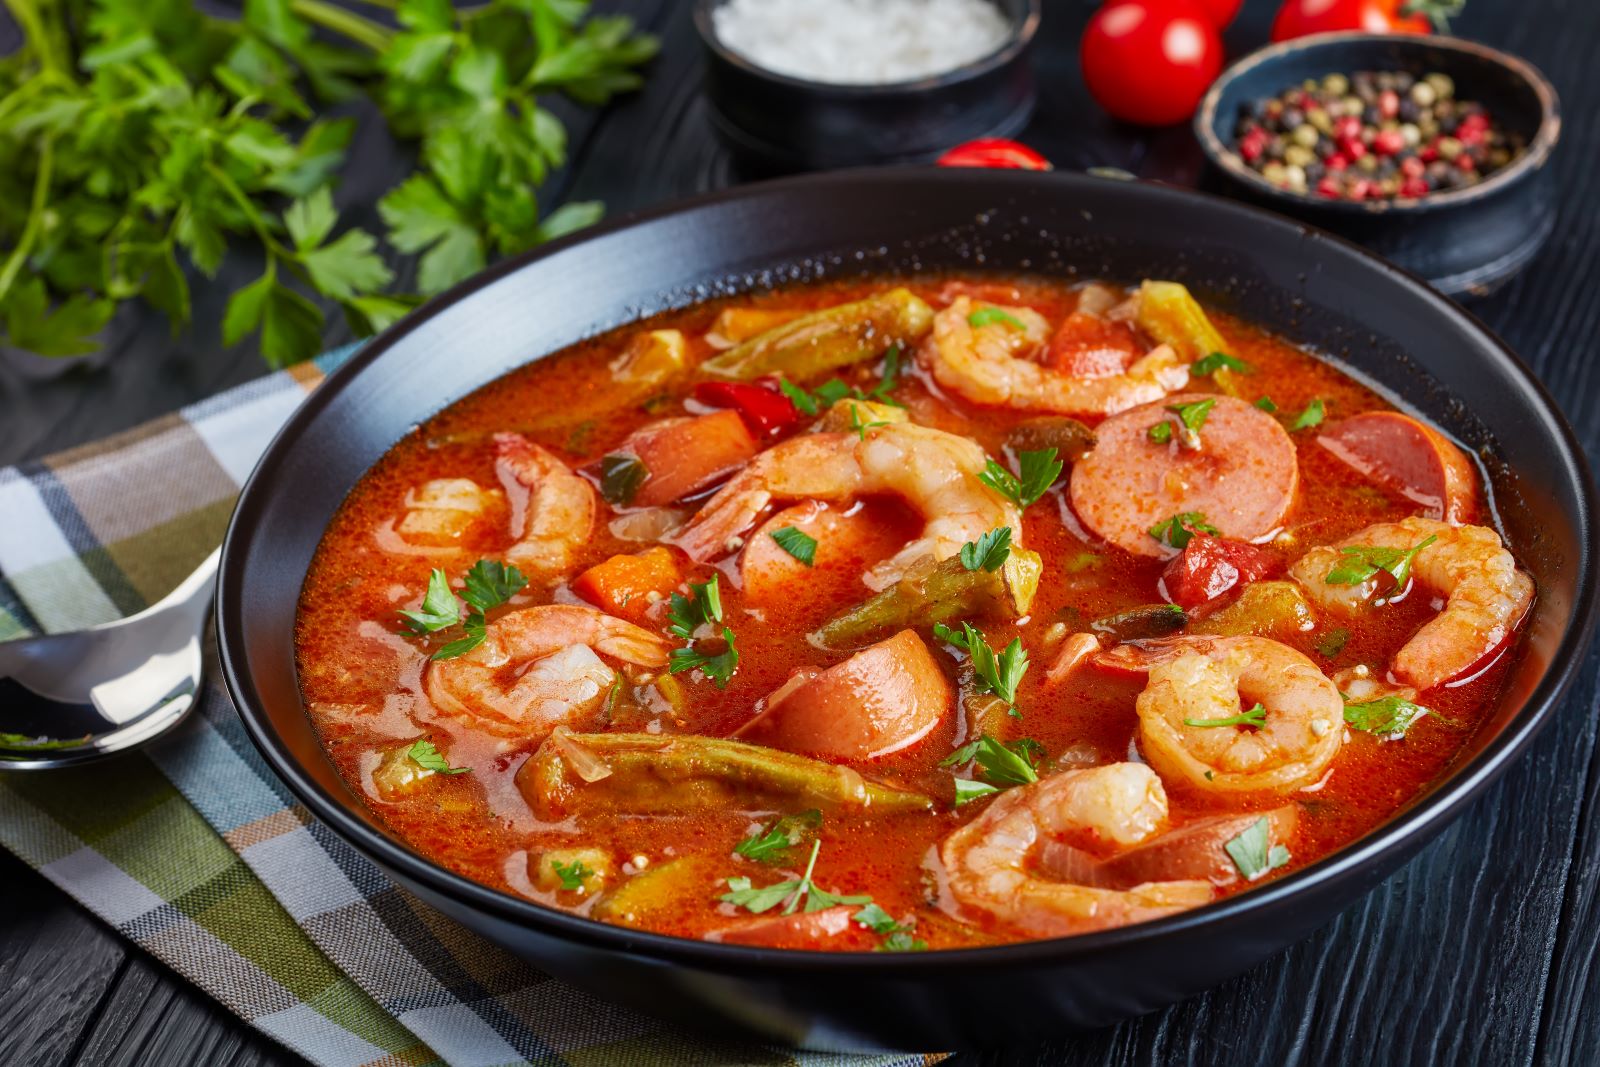 Image Credit: Shutterstock /from my point of view <p><span>A melting pot in a pot, this Louisiana Creole dish features a flavorful roux, okra, sausage, shrimp, and a blend of spices that sing with every spoonful.</span></p>